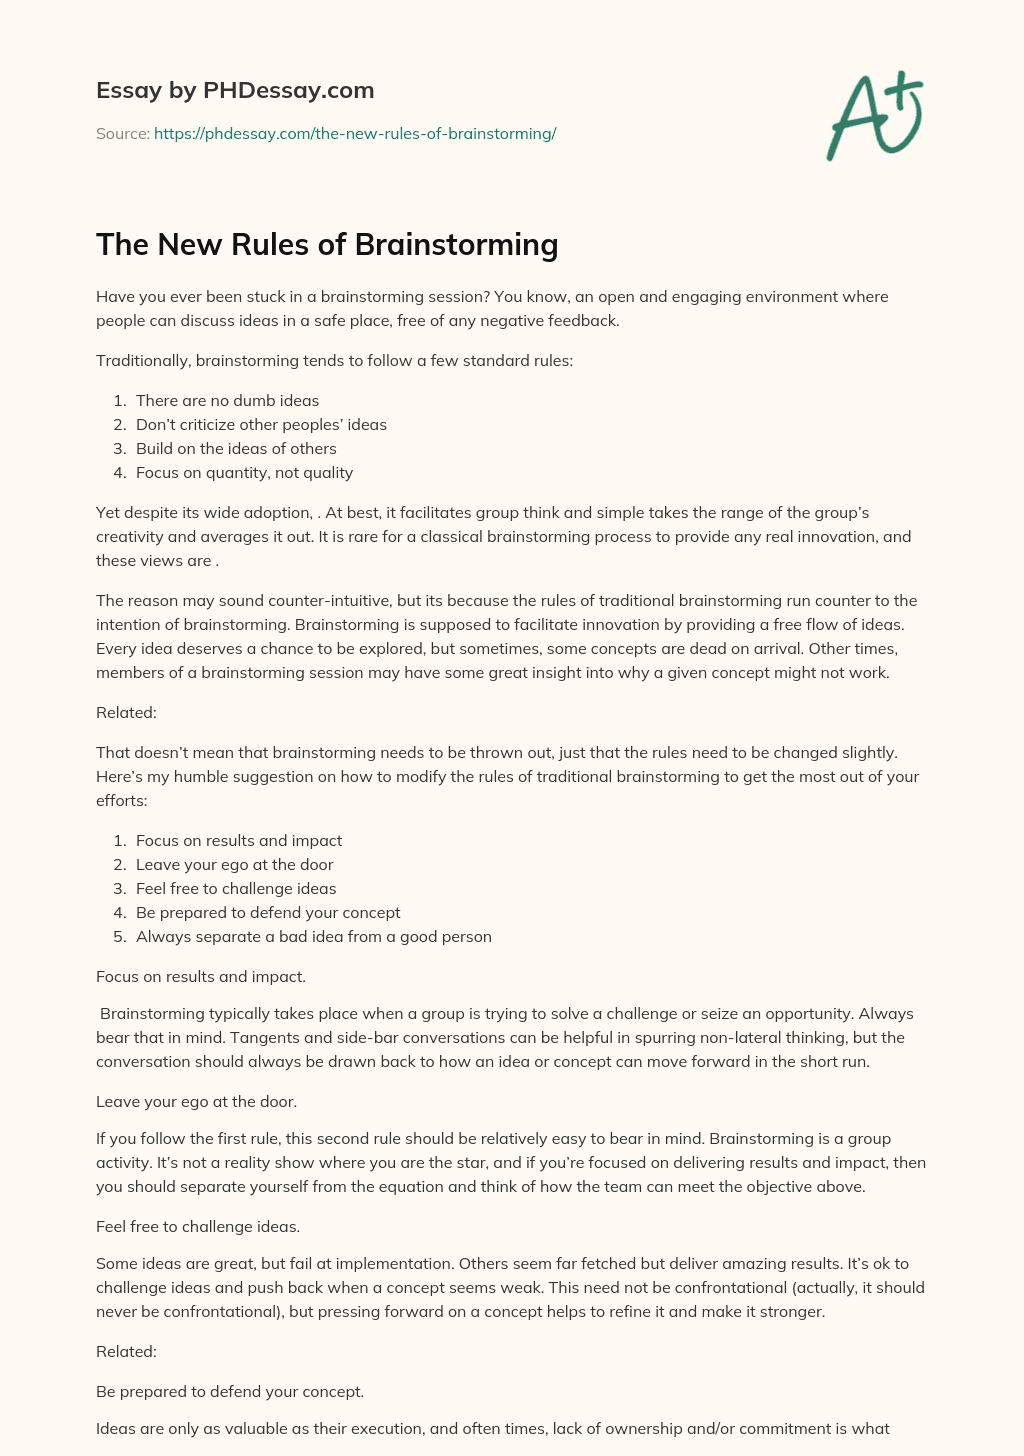 The New Rules of Brainstorming essay